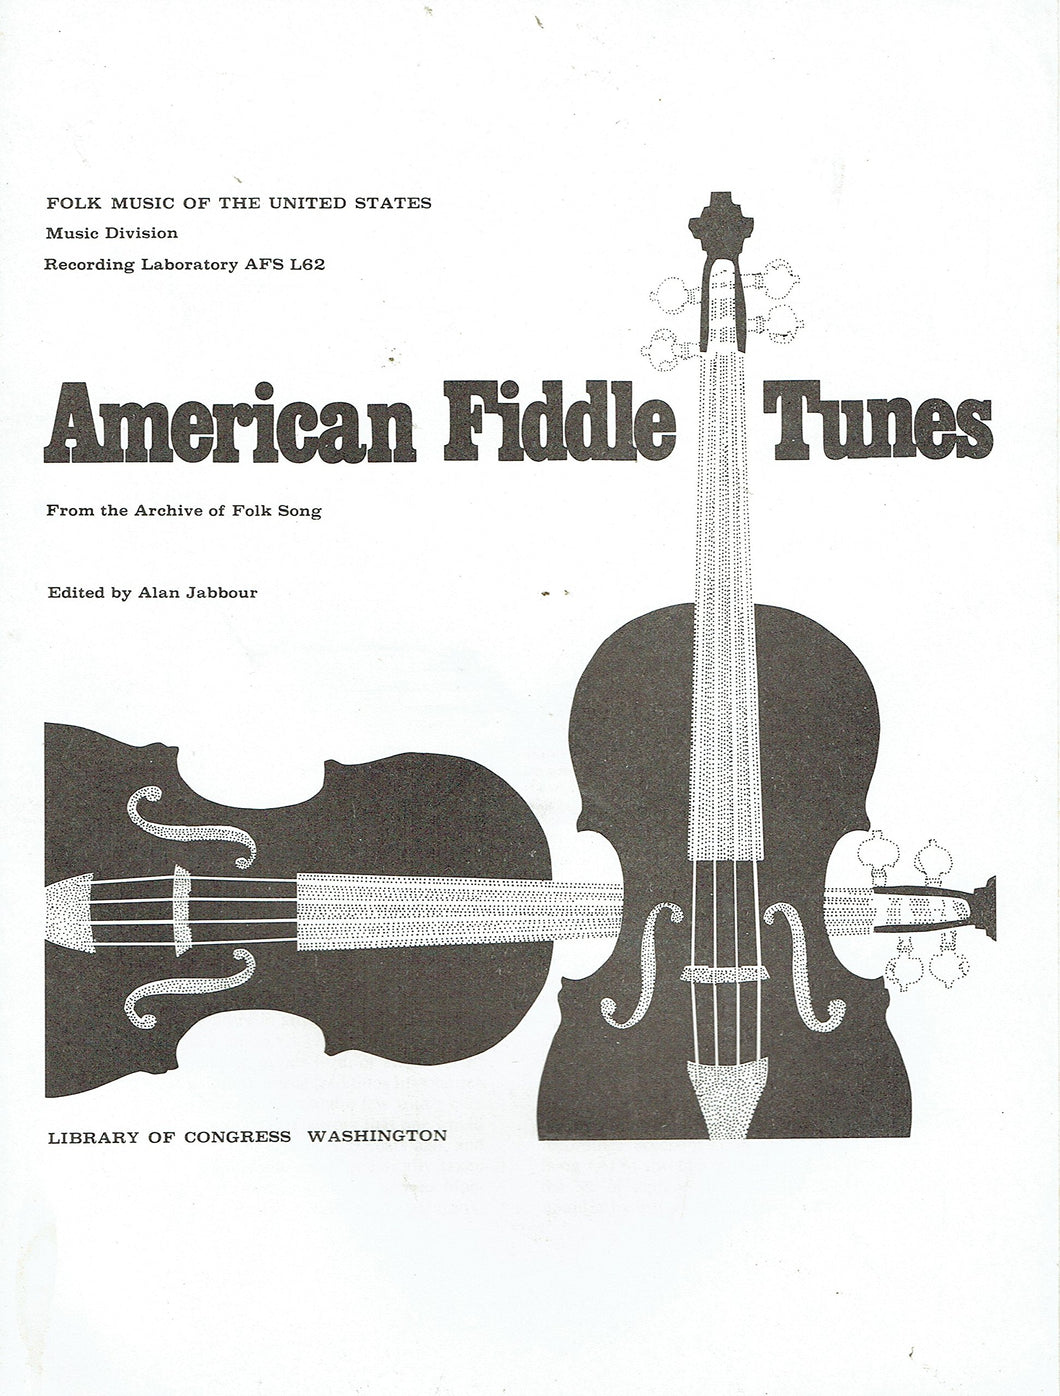 American Fiddle Tunes from the Archive of Folk Song: Folk Music of the United States, Music Division, Music Laboratory AFS L62